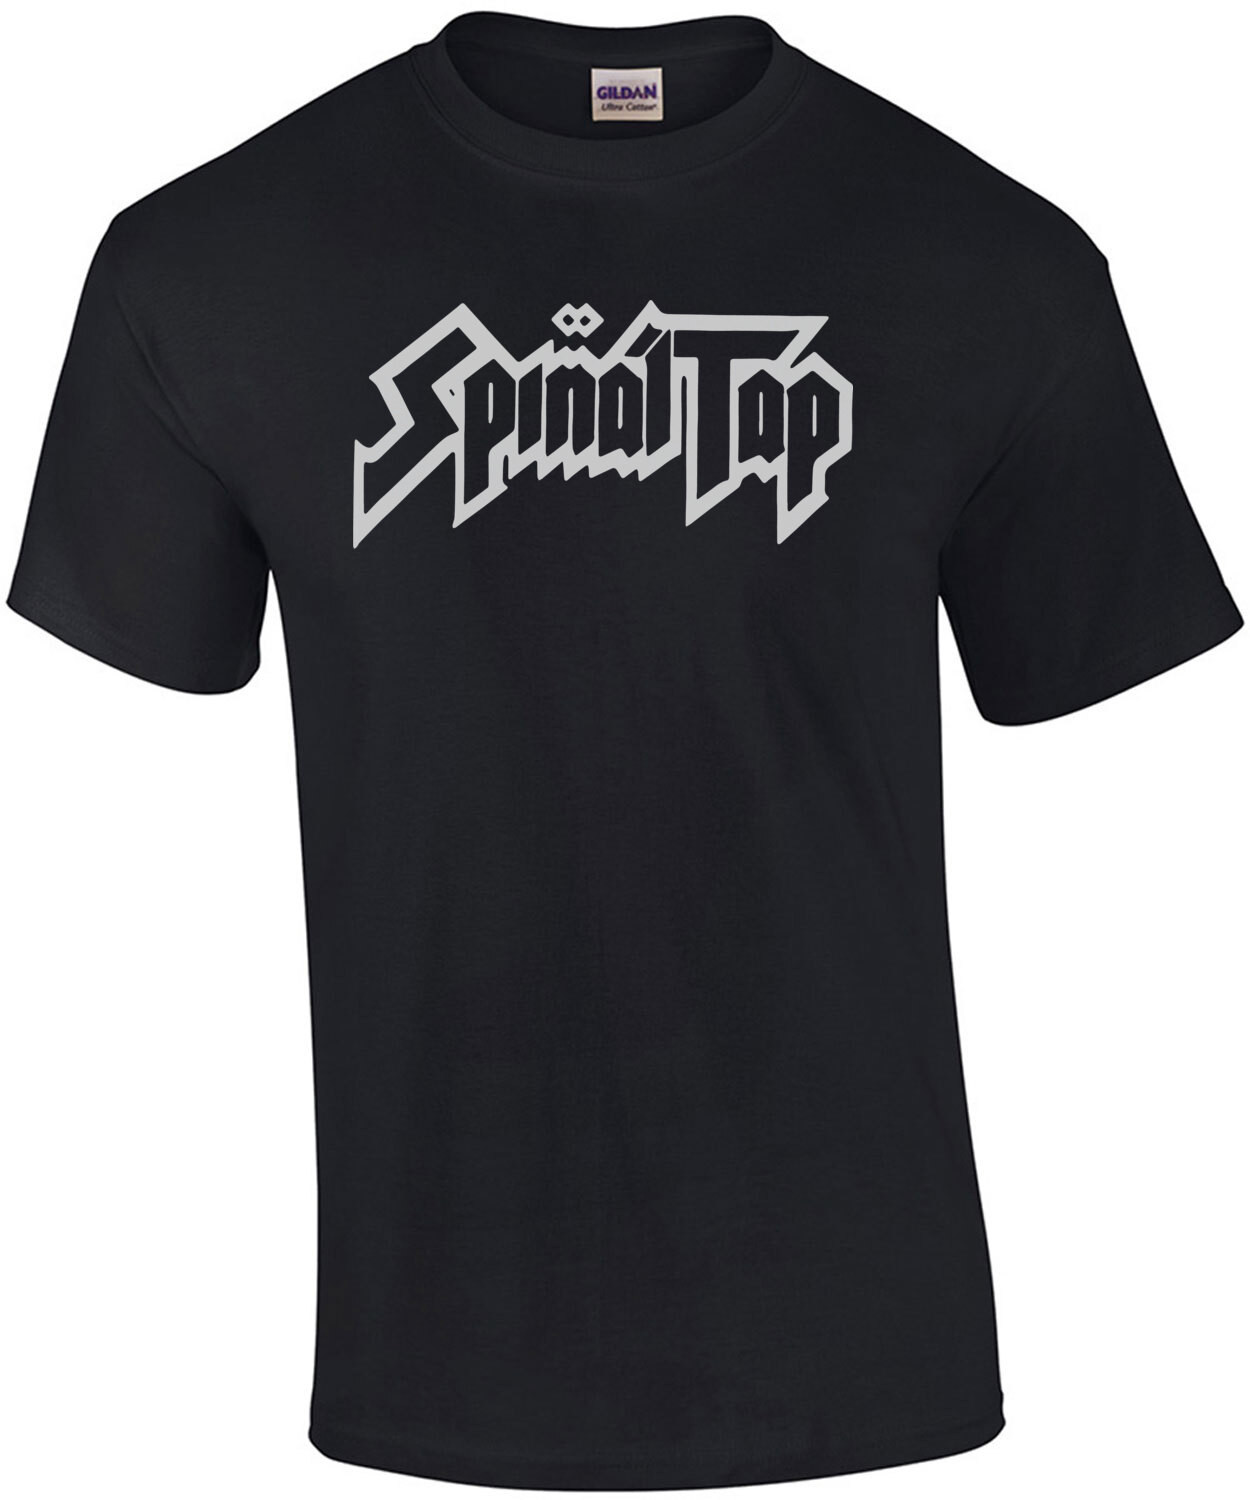 This is Spinal Tap - 80's T-Shirt